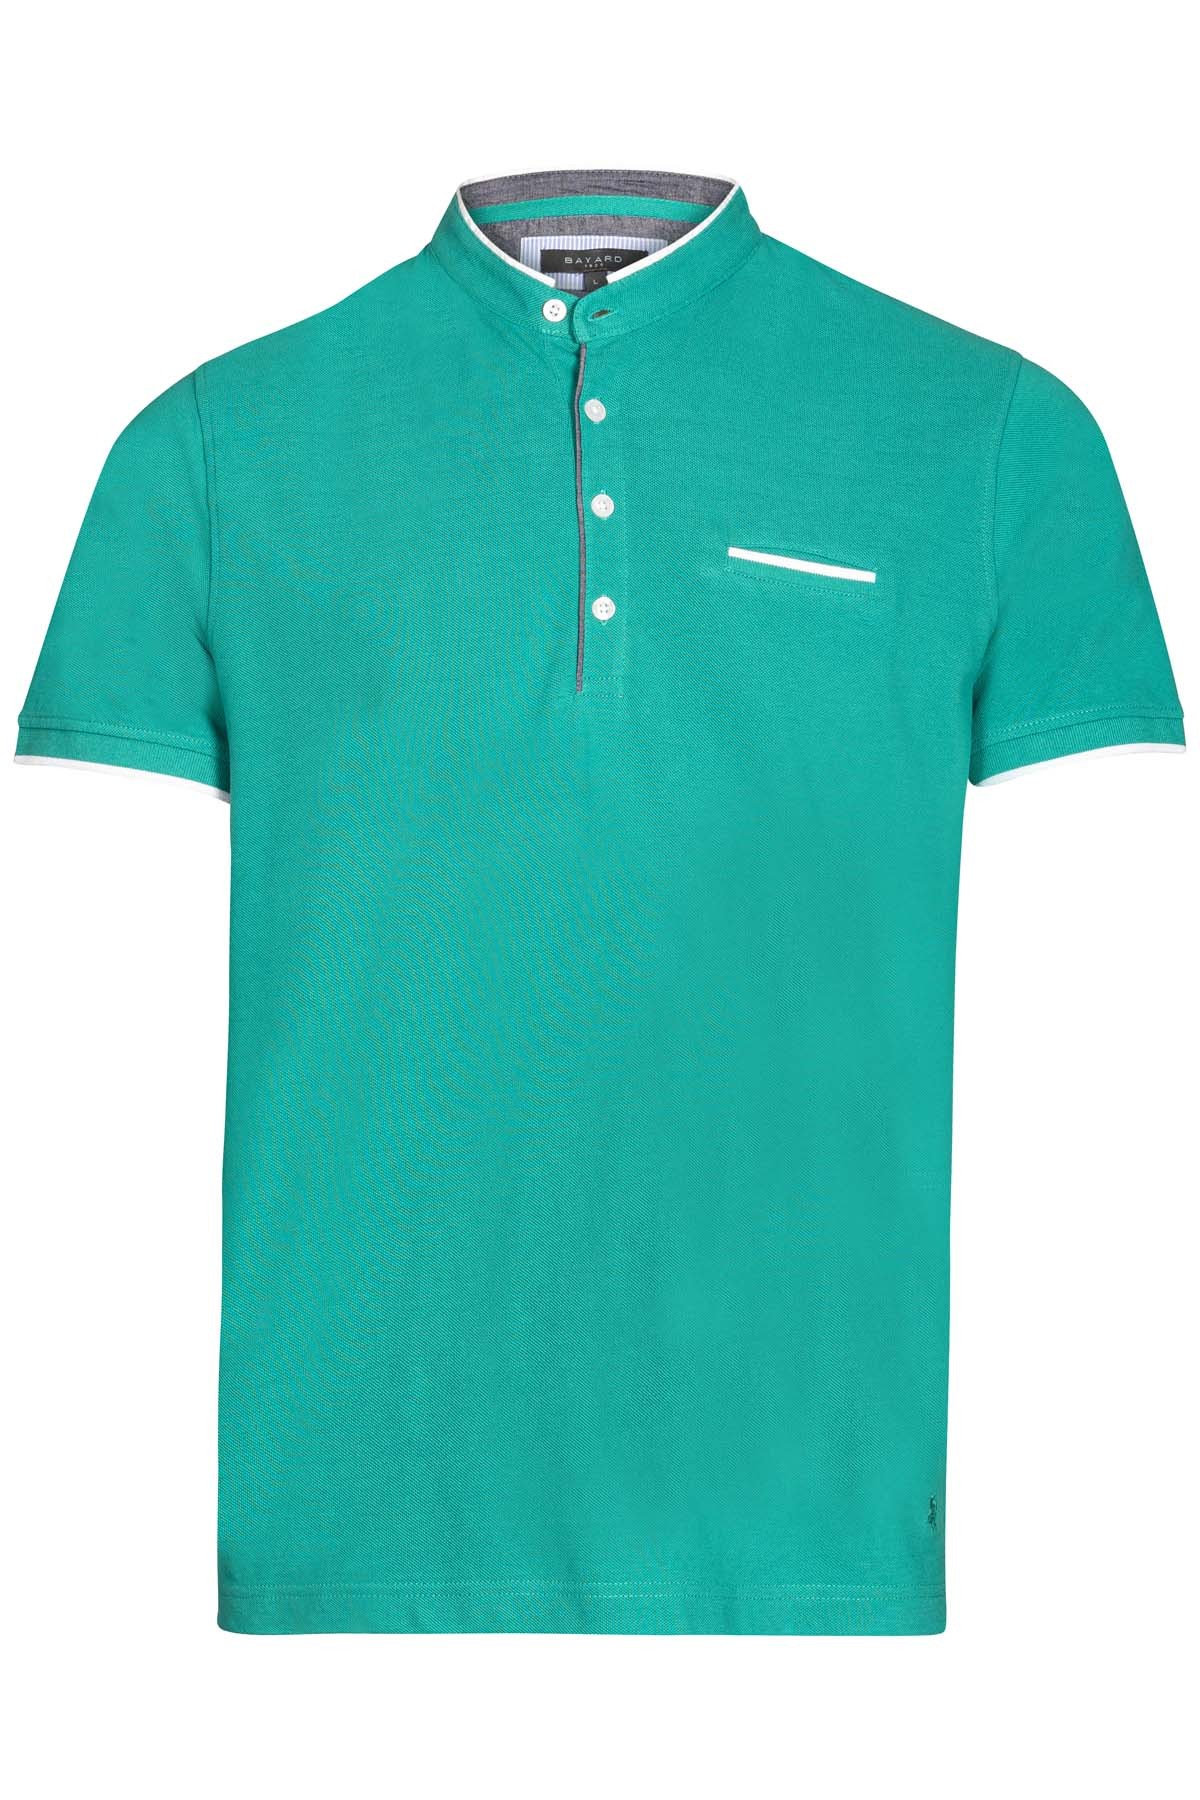 polo manches courtes couleur turquoise bayard